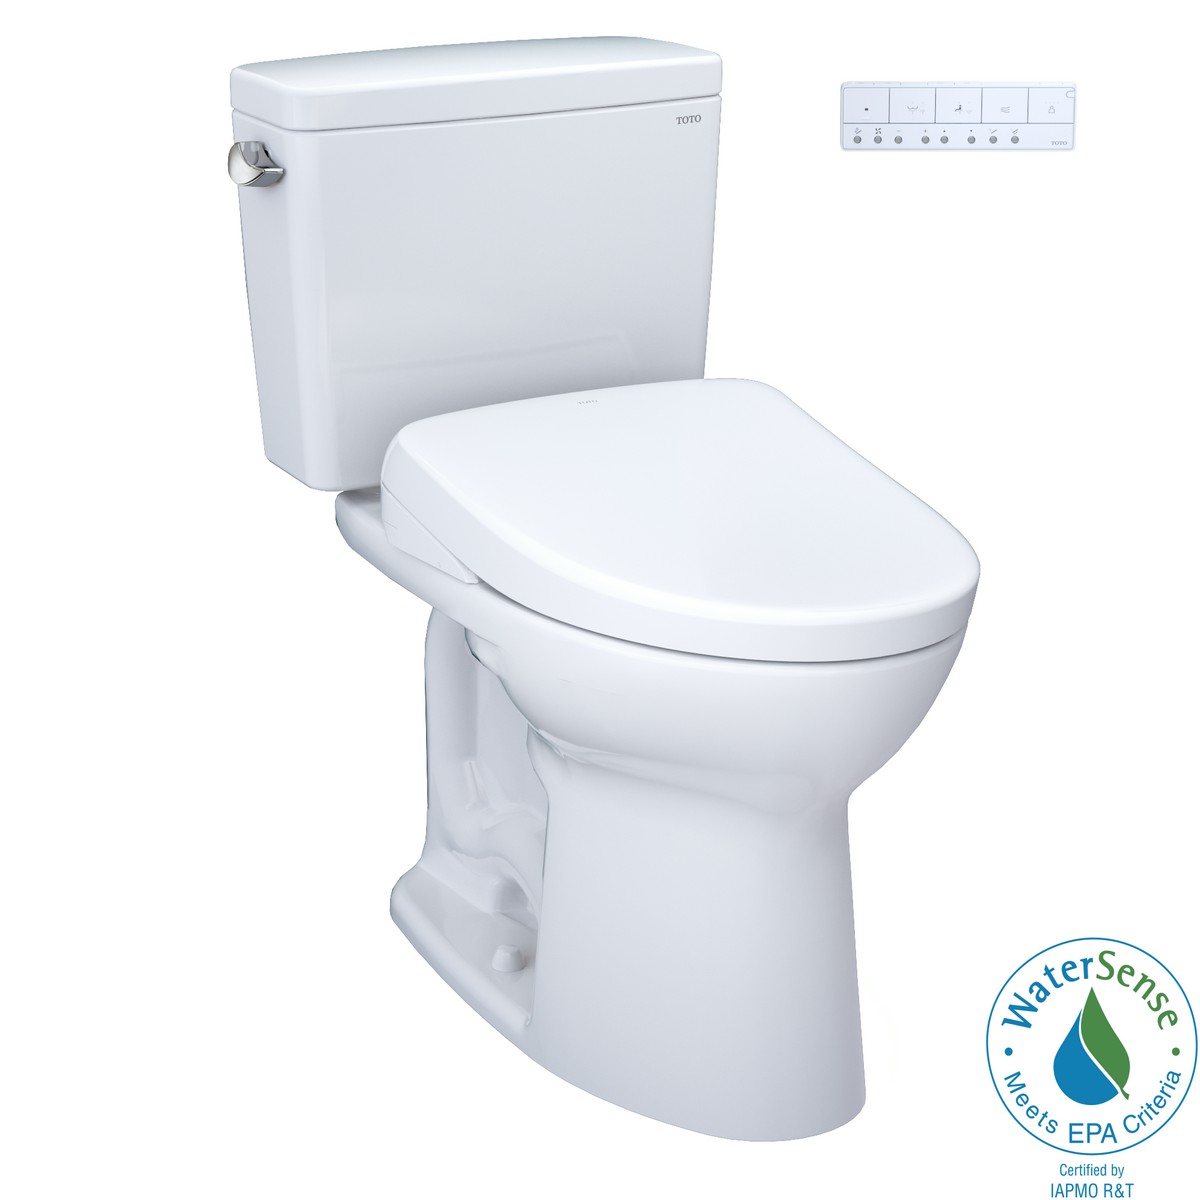 TOTO MW7764726CEF.10#01 DRAKE WASHLET+ 1.28 GPF TWO PIECE 10 INCH ROUGH-IN ELONGATED UNIVERSAL HEIGHT TORNADO FLUSH TOILET WITH WASHLET S7 BIDET SEAT IN COTTON WHITE